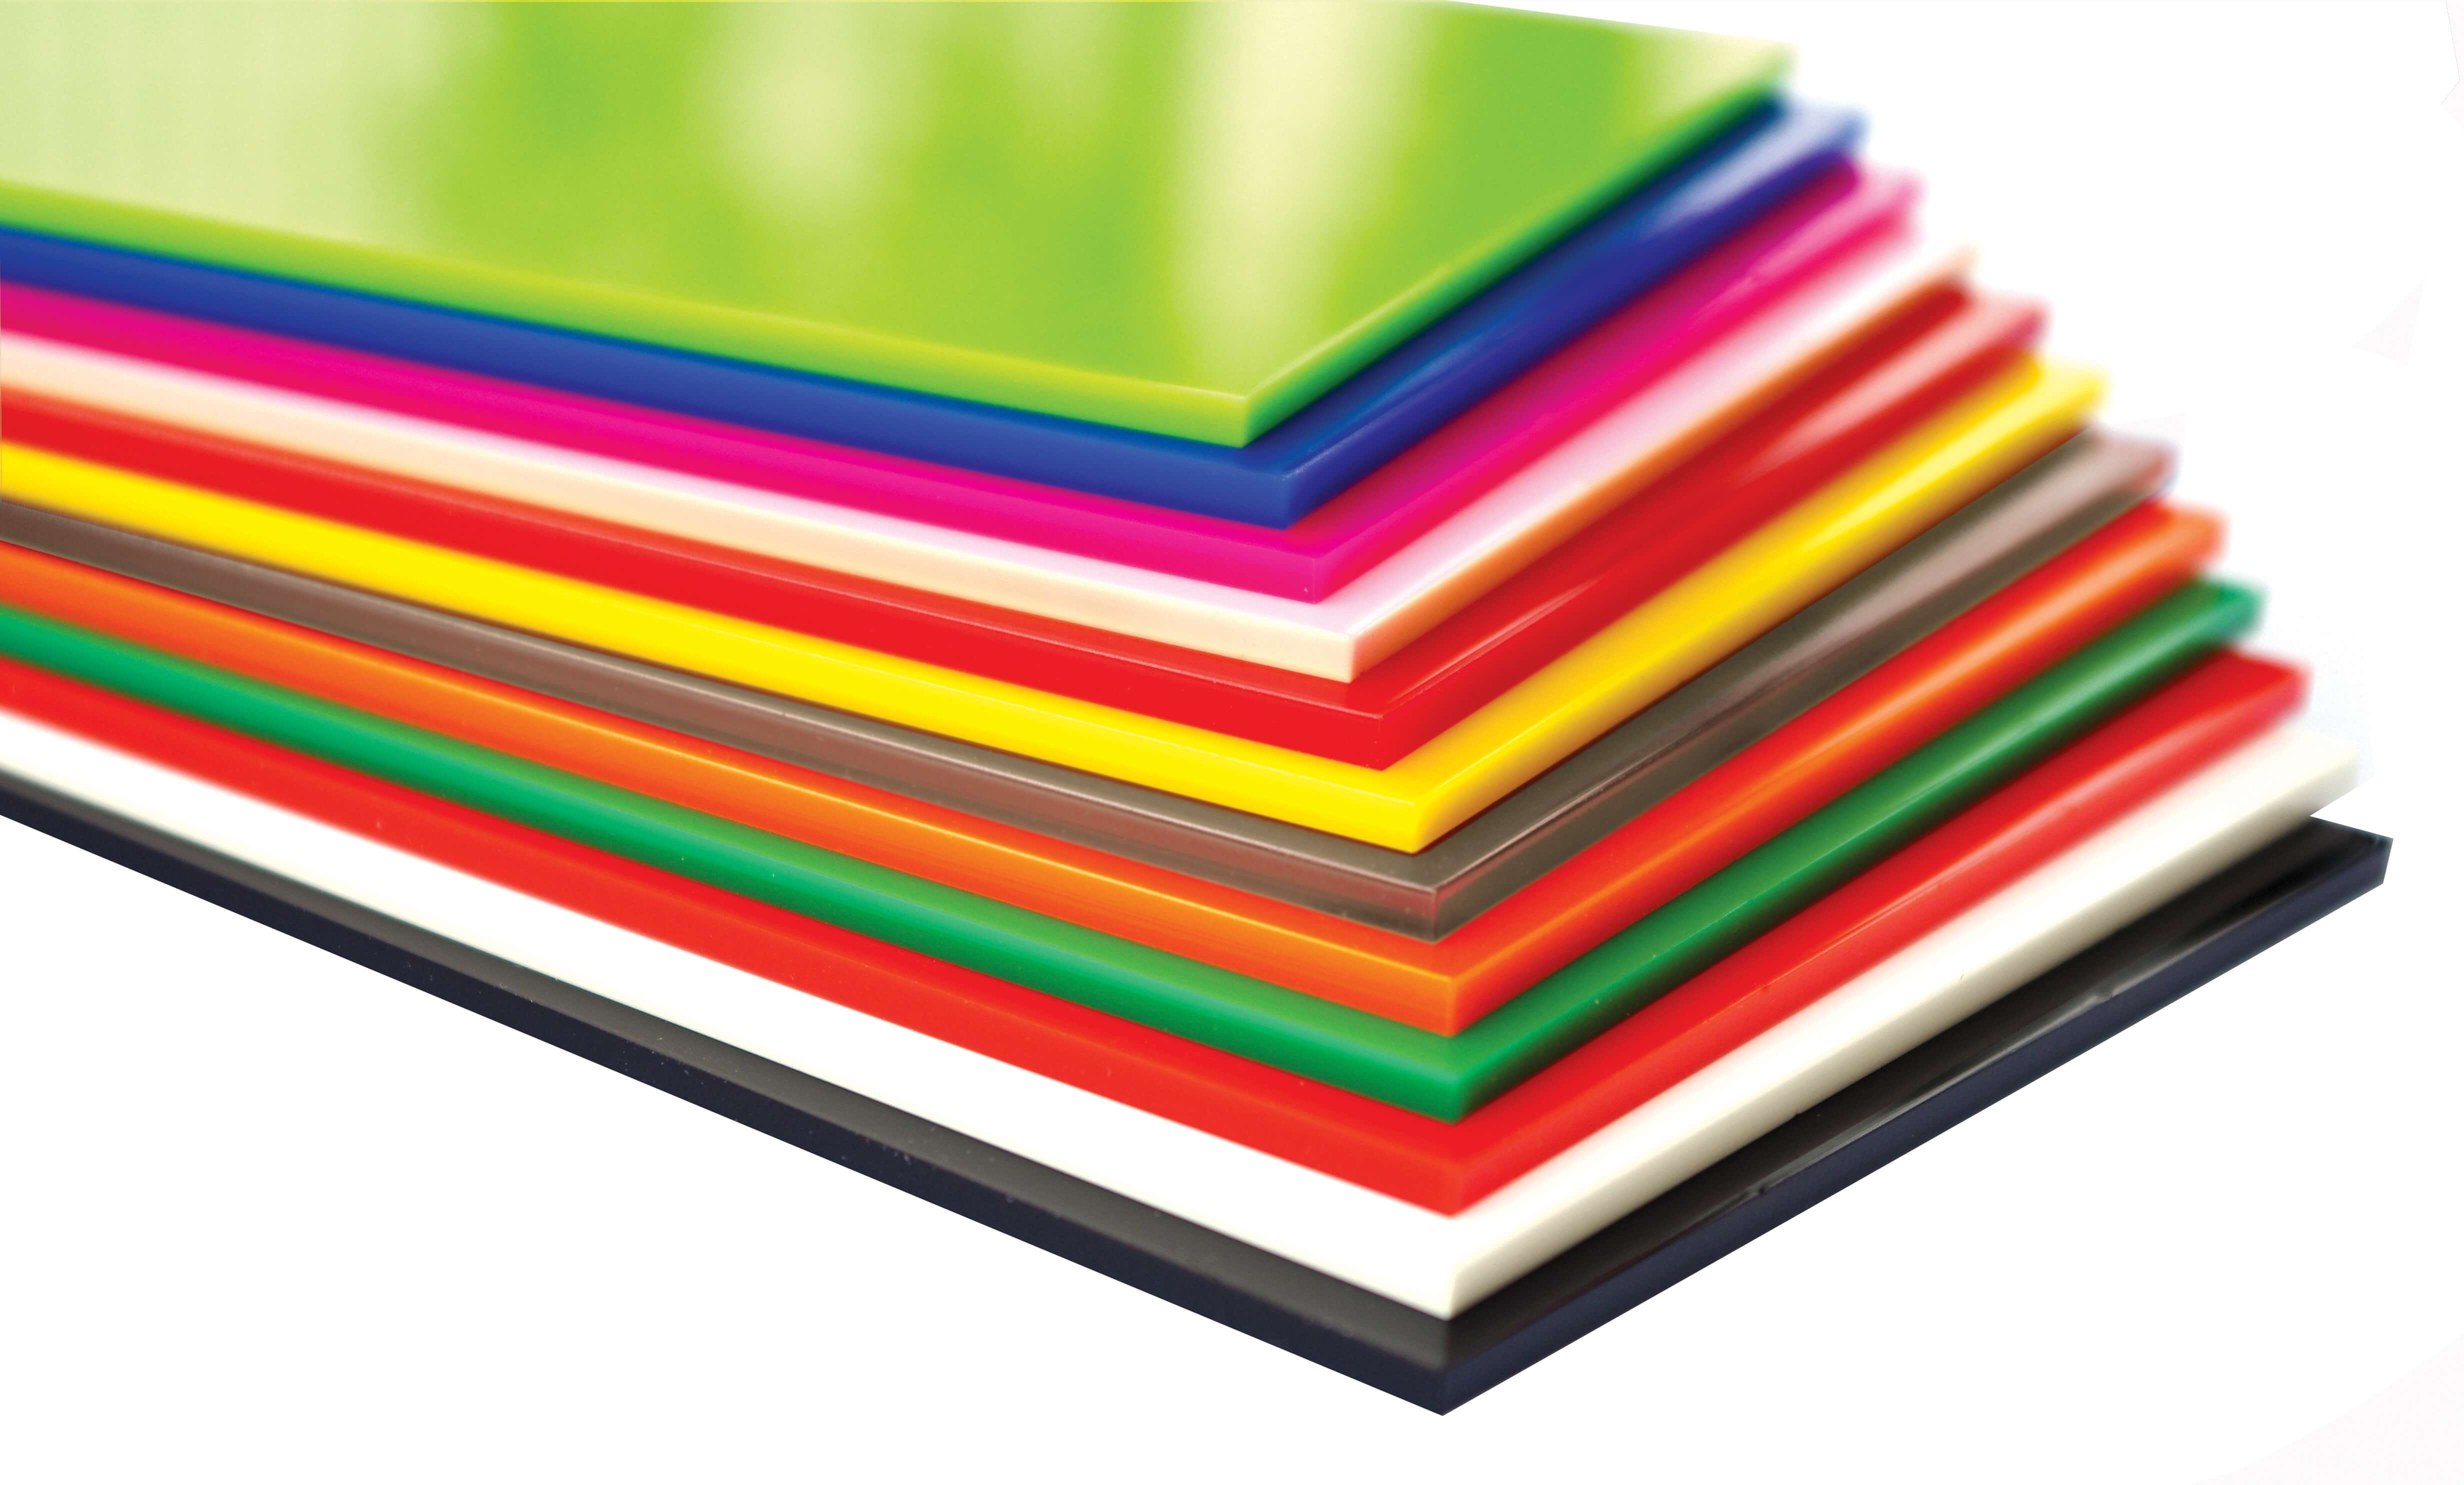 Cast Acrylic 3mm Sheet - 600 x 400mm Assorted Pack of 12